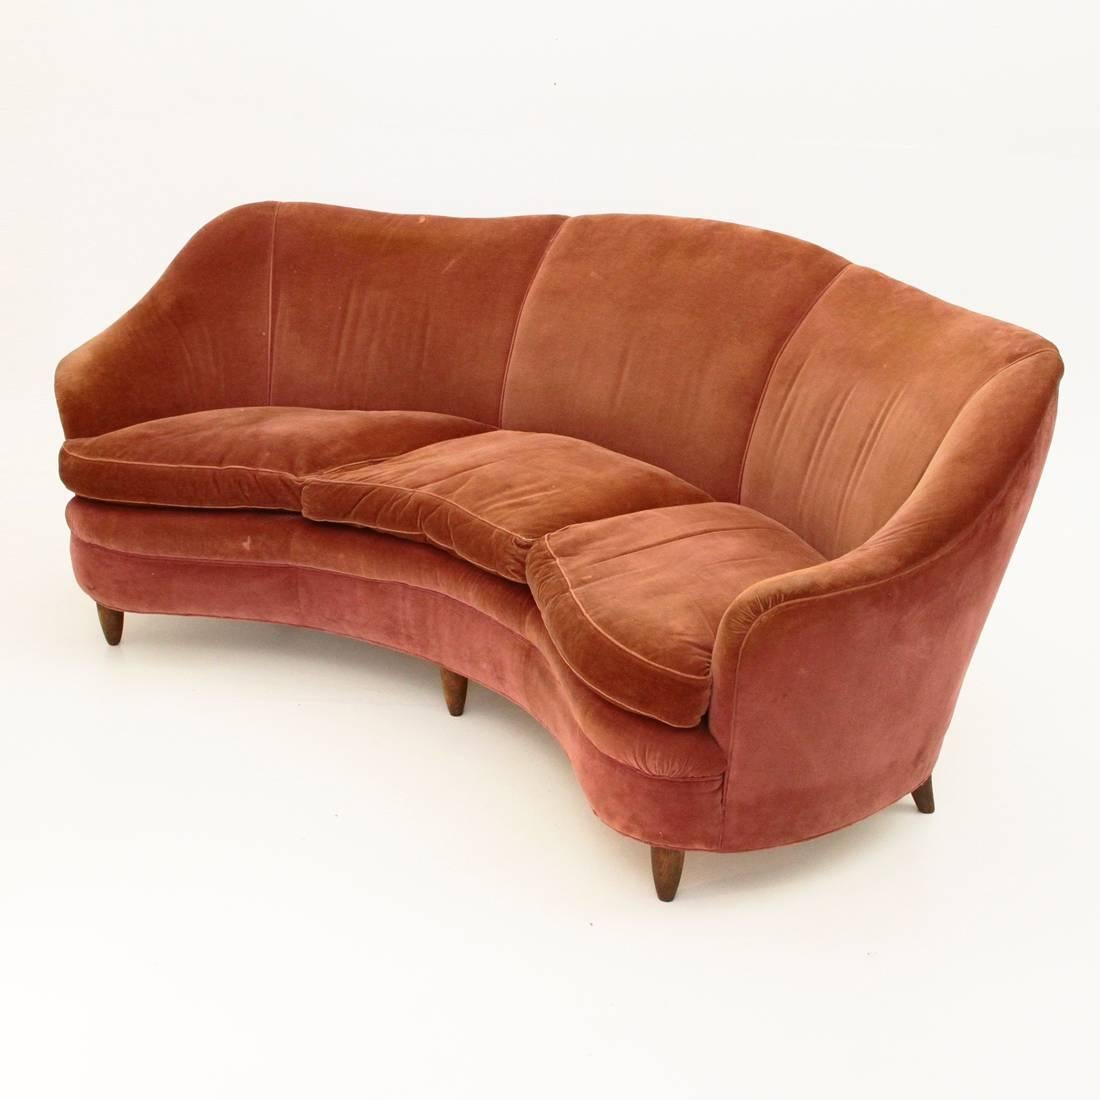 This curved sofa was produced in Italy in the 1950s. The frame is made from wood and the seats are upholstered in velvet. The feet are conical, there are three seats.